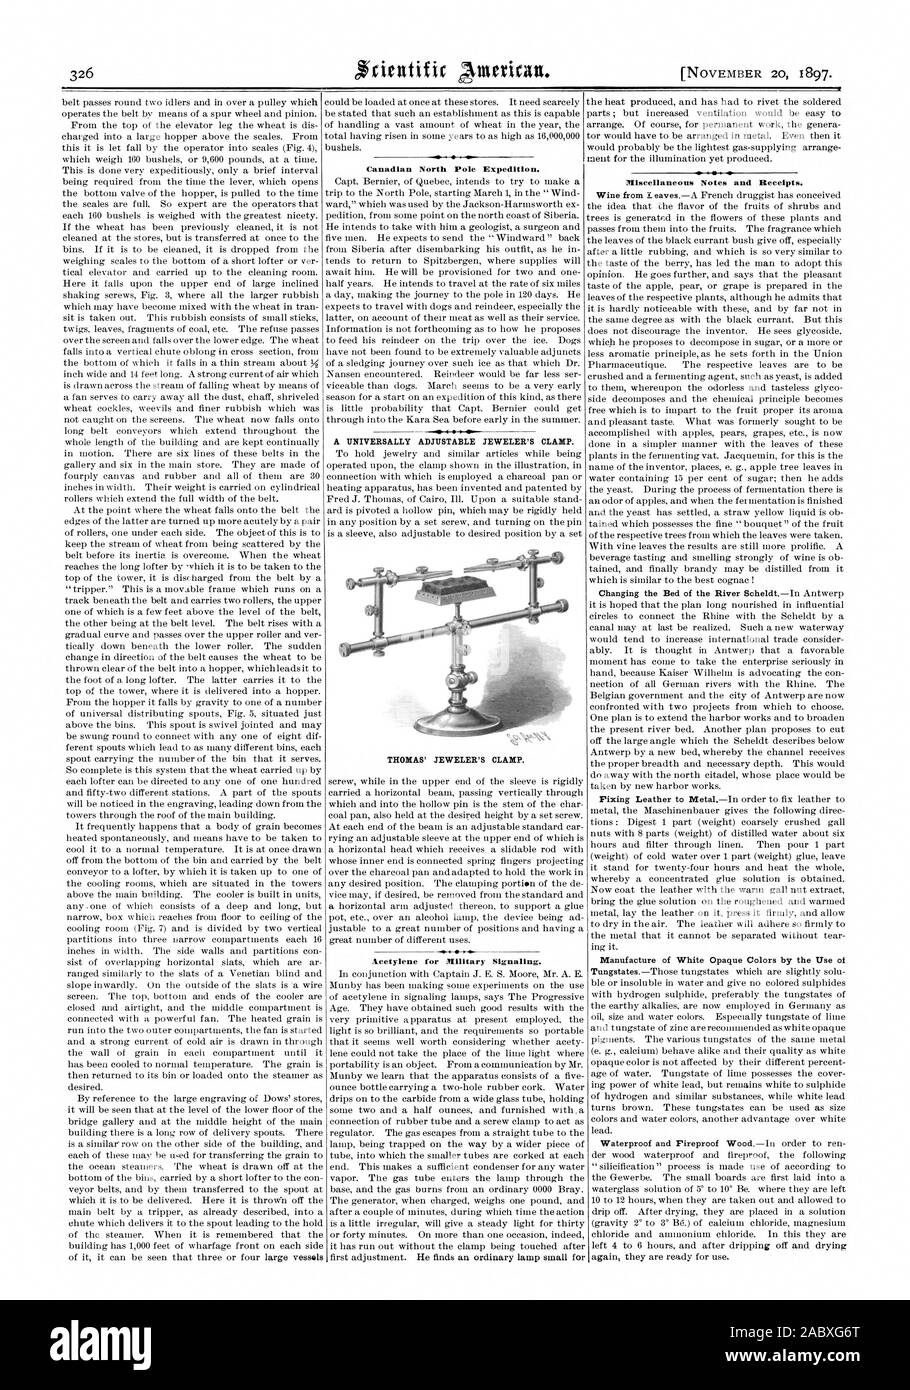 Canadian North Pole Expedition. 4 . Acetylene for Military Signaling. Miscellaneous Notes and Receipts., scientific american, 1897-11-20 Stock Photo